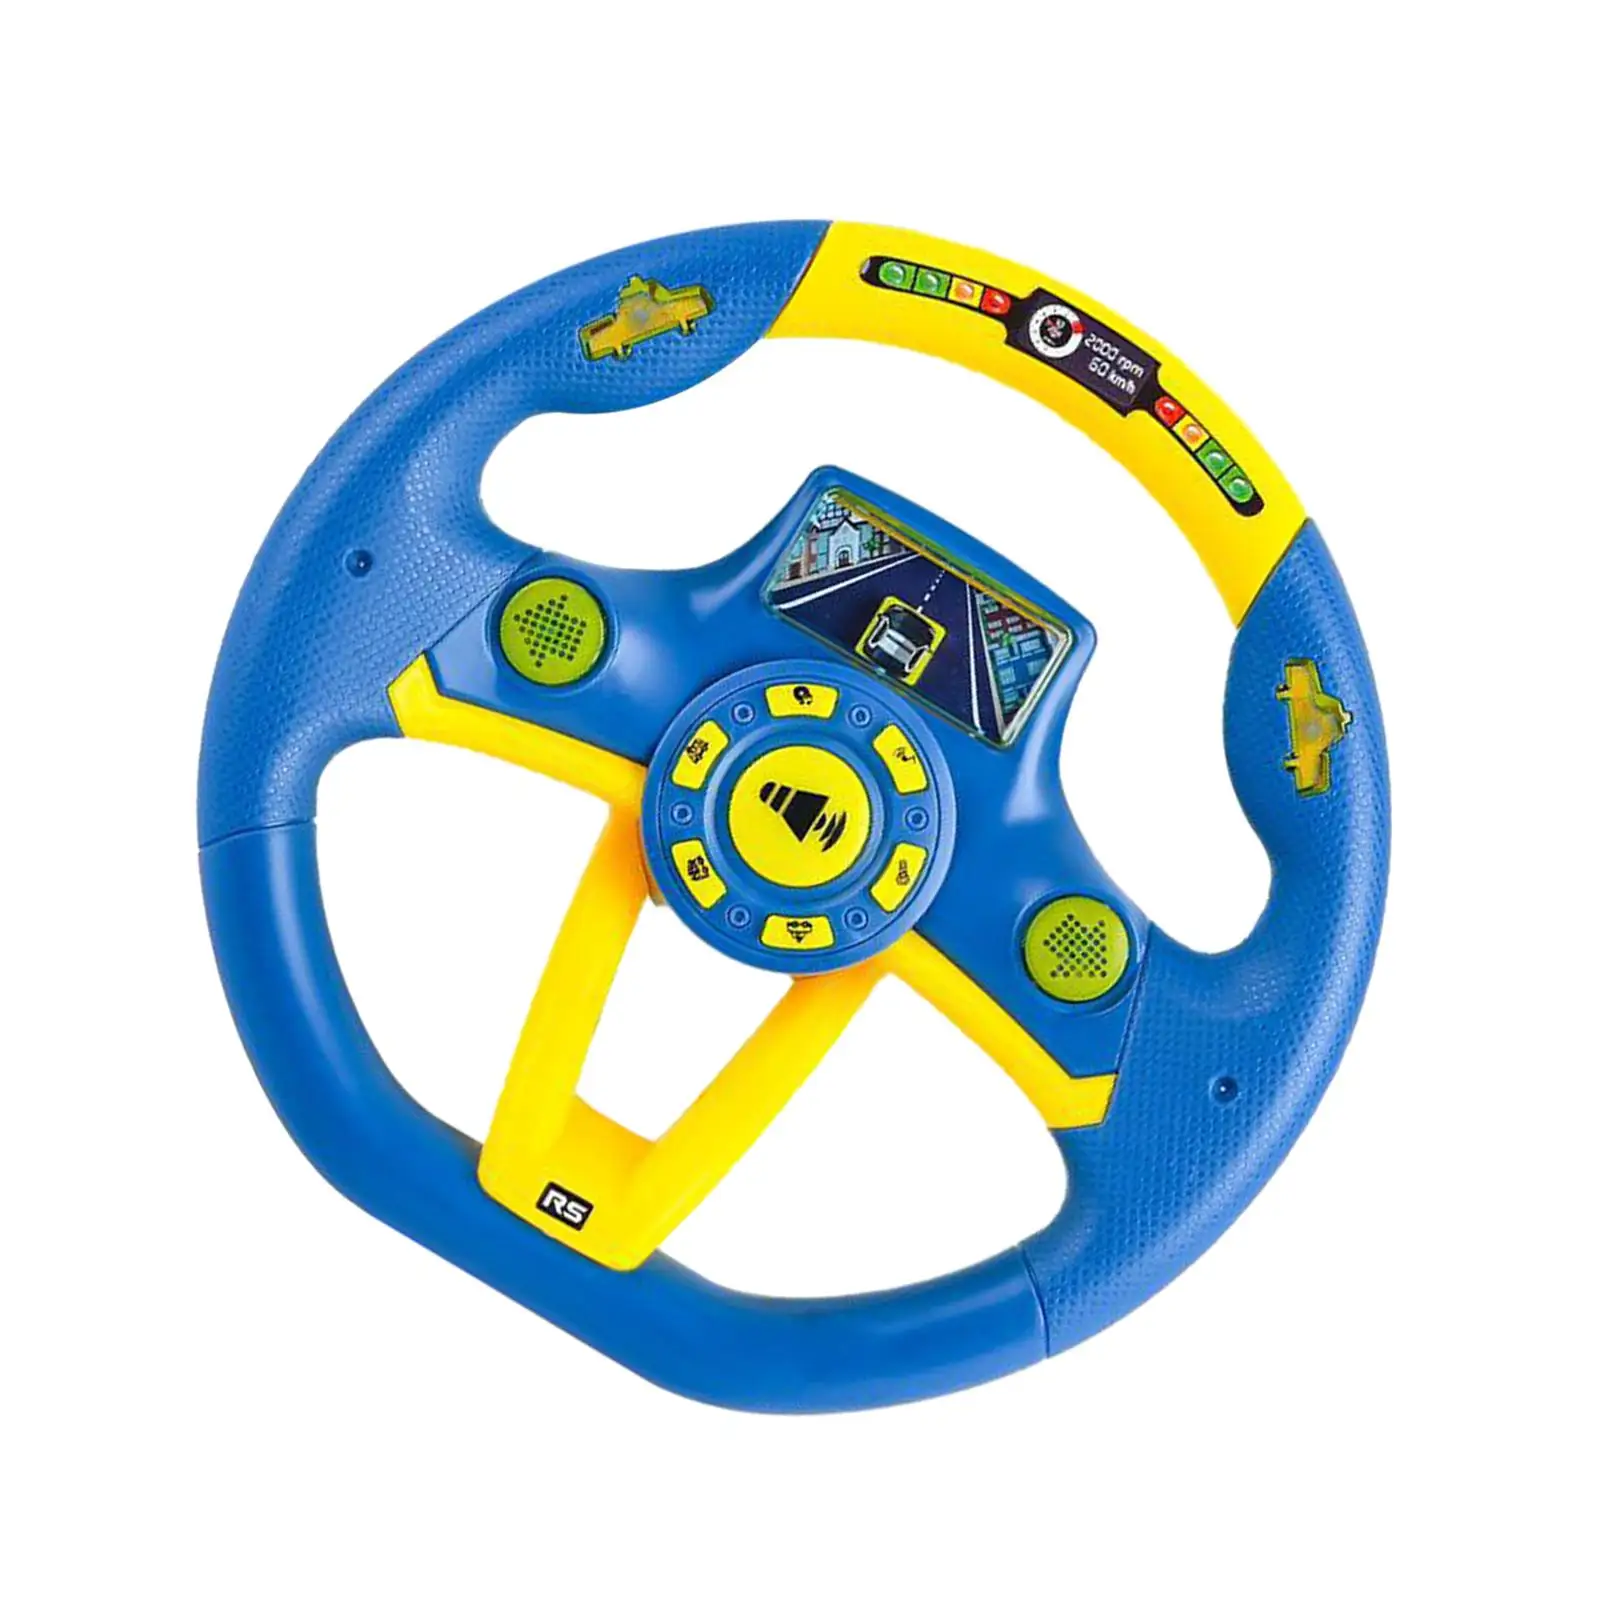 Round Steering Wheel Toy Musical Activity Toy Busy Board DIY Accessory for Outdoor Garden Busy Board Backyard Birthday Gifts